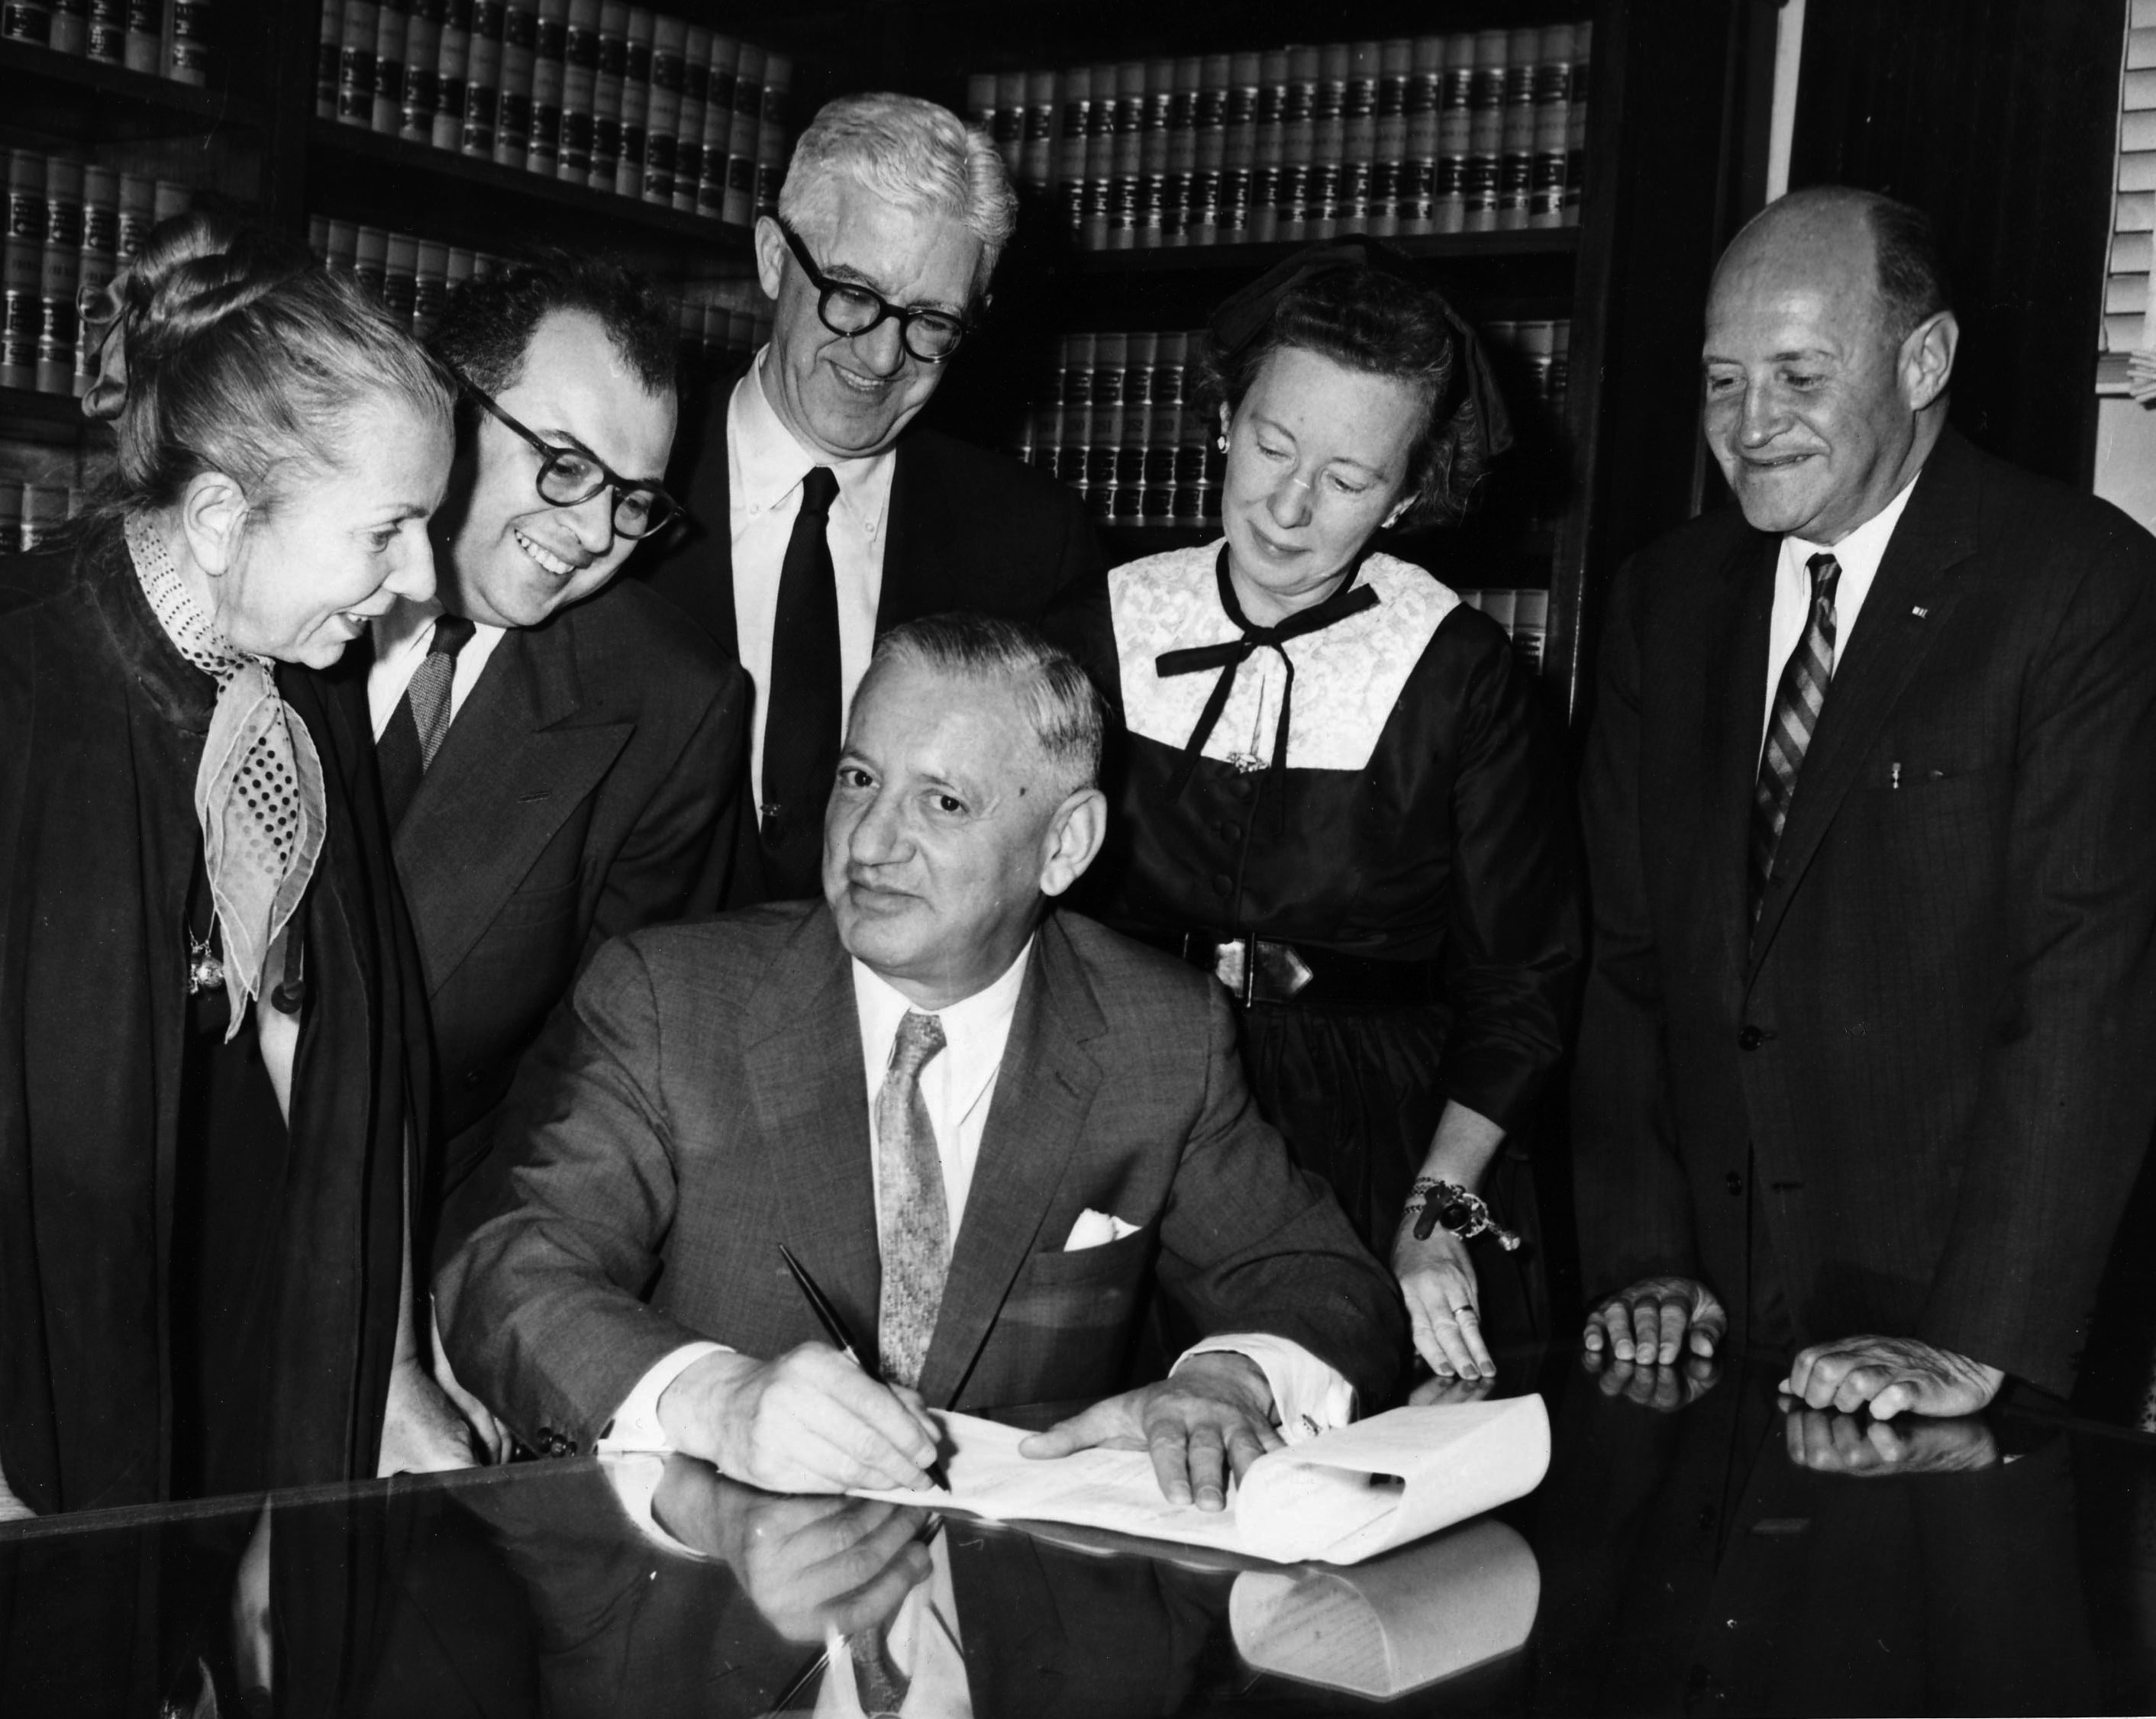 Judge Saul Streit, Presiding Justice of the New York Supreme Court (seated), signs the incorporation documents witnessed by original Members (left to right) Hanya Holm, Ezra Stone, Shepard Traube, Agnes de Mille + legal counsel Erwin Feldman.